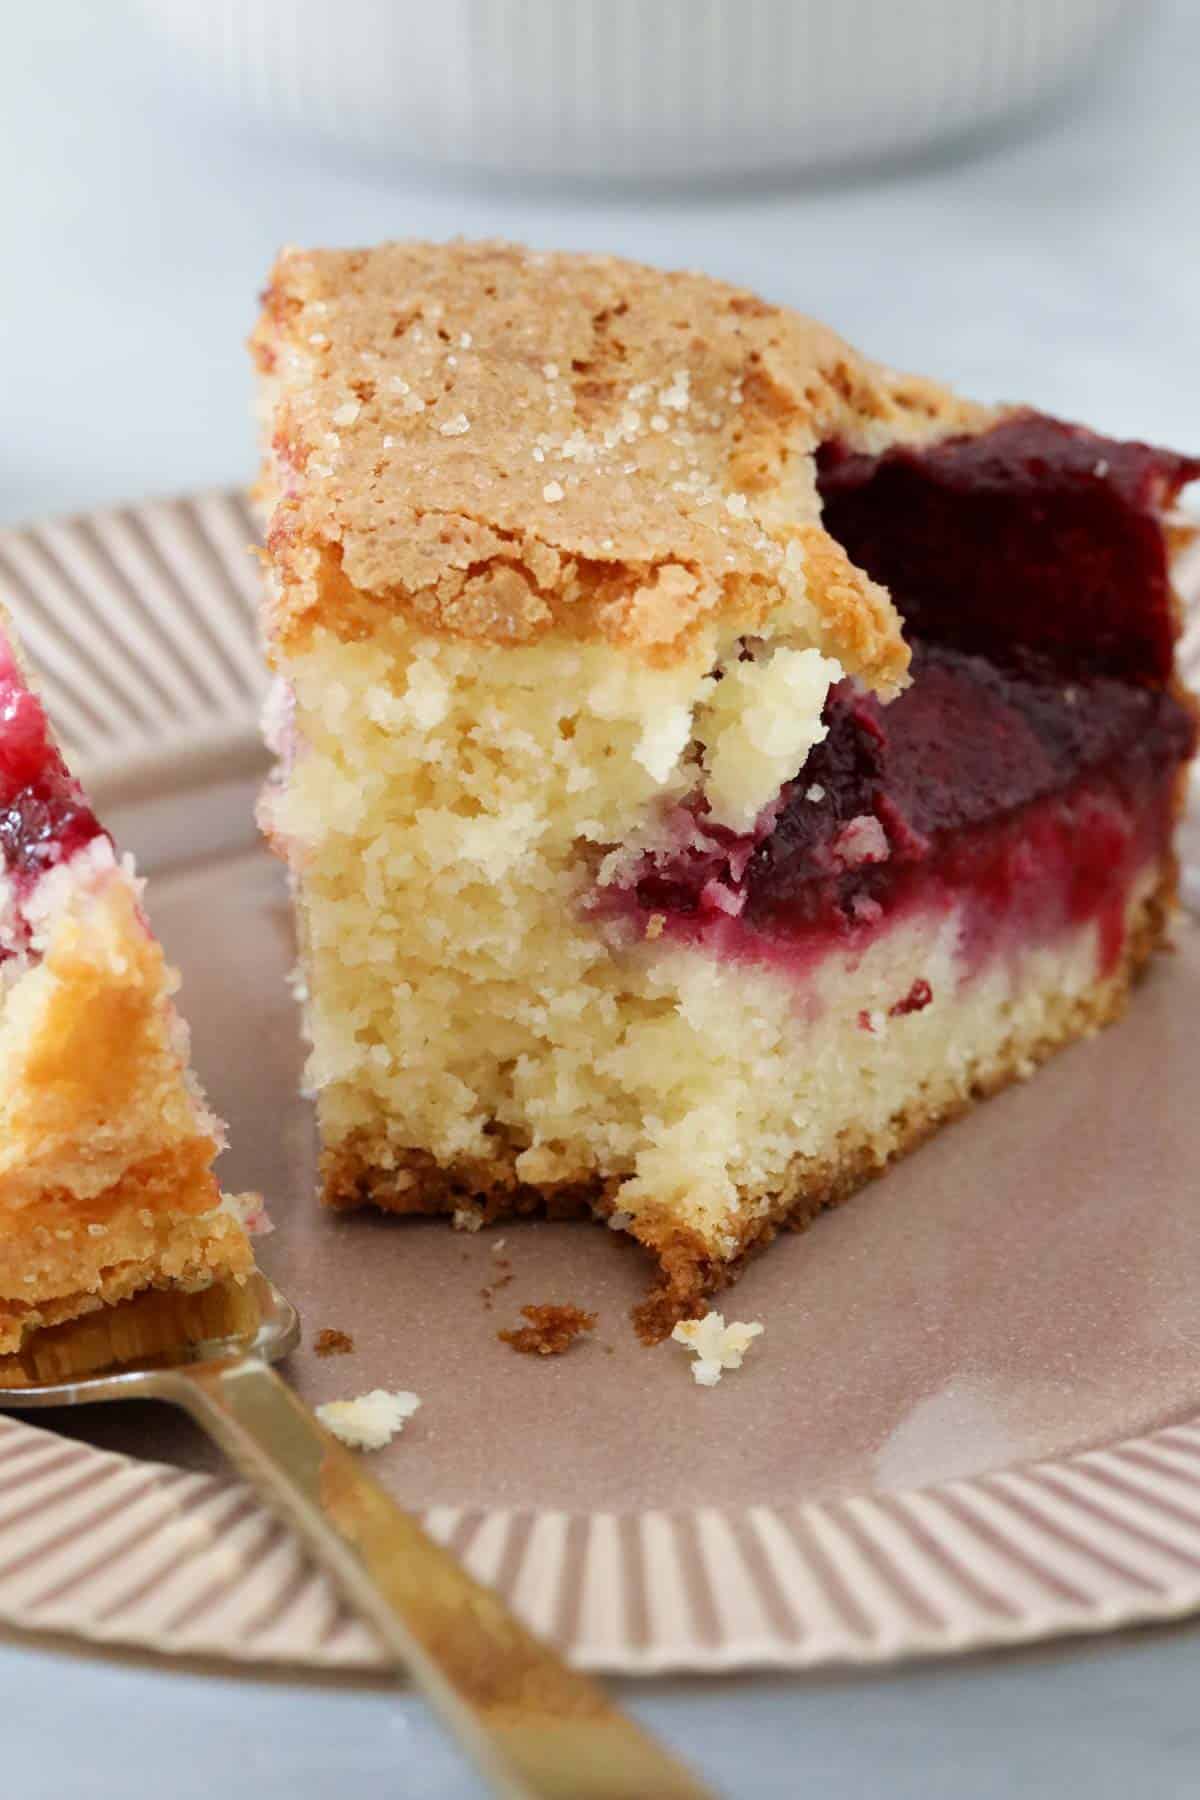 A slice of plum cake on a plate with a fork holding a small portion of the cake.